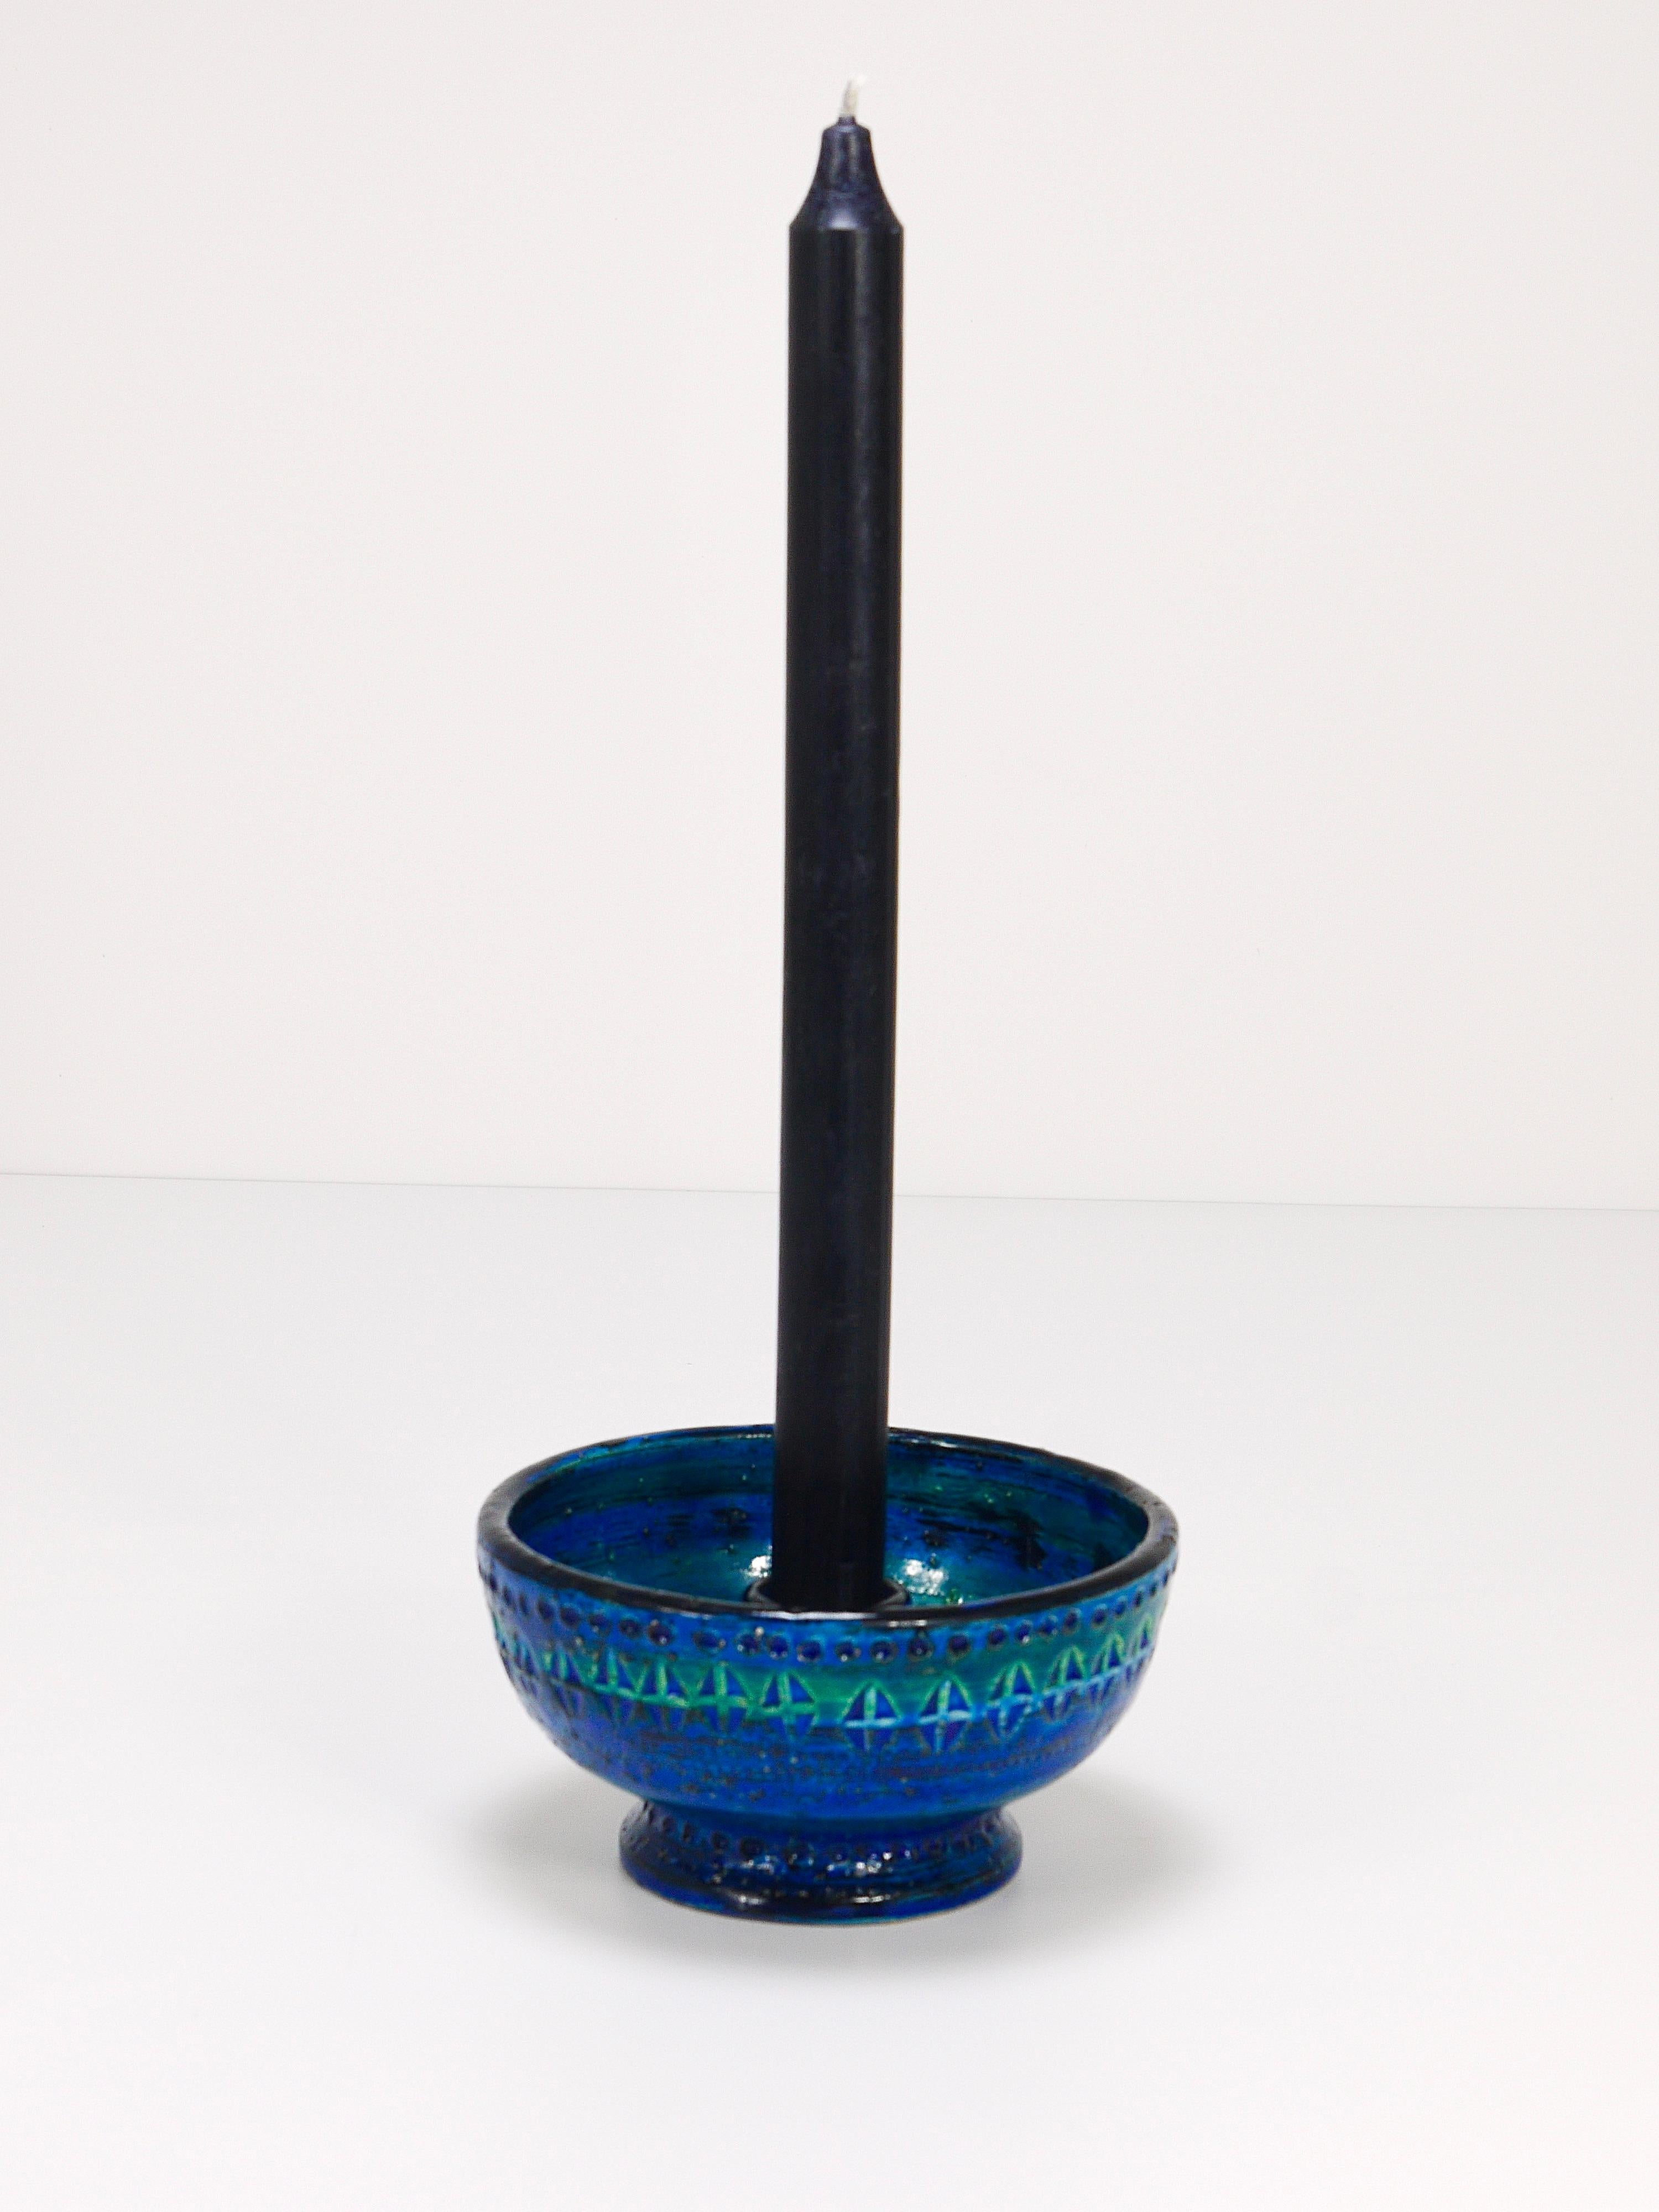 A beautiful and decorative midcentury Rimini blue glazed round candle holder or candlestick. Designed by Aldo Londi, manufactured by Bitossi Ceramiche / Italy in the 1950s. Handcrafted with hand carved geometric design in a glazed vibrant turquoise